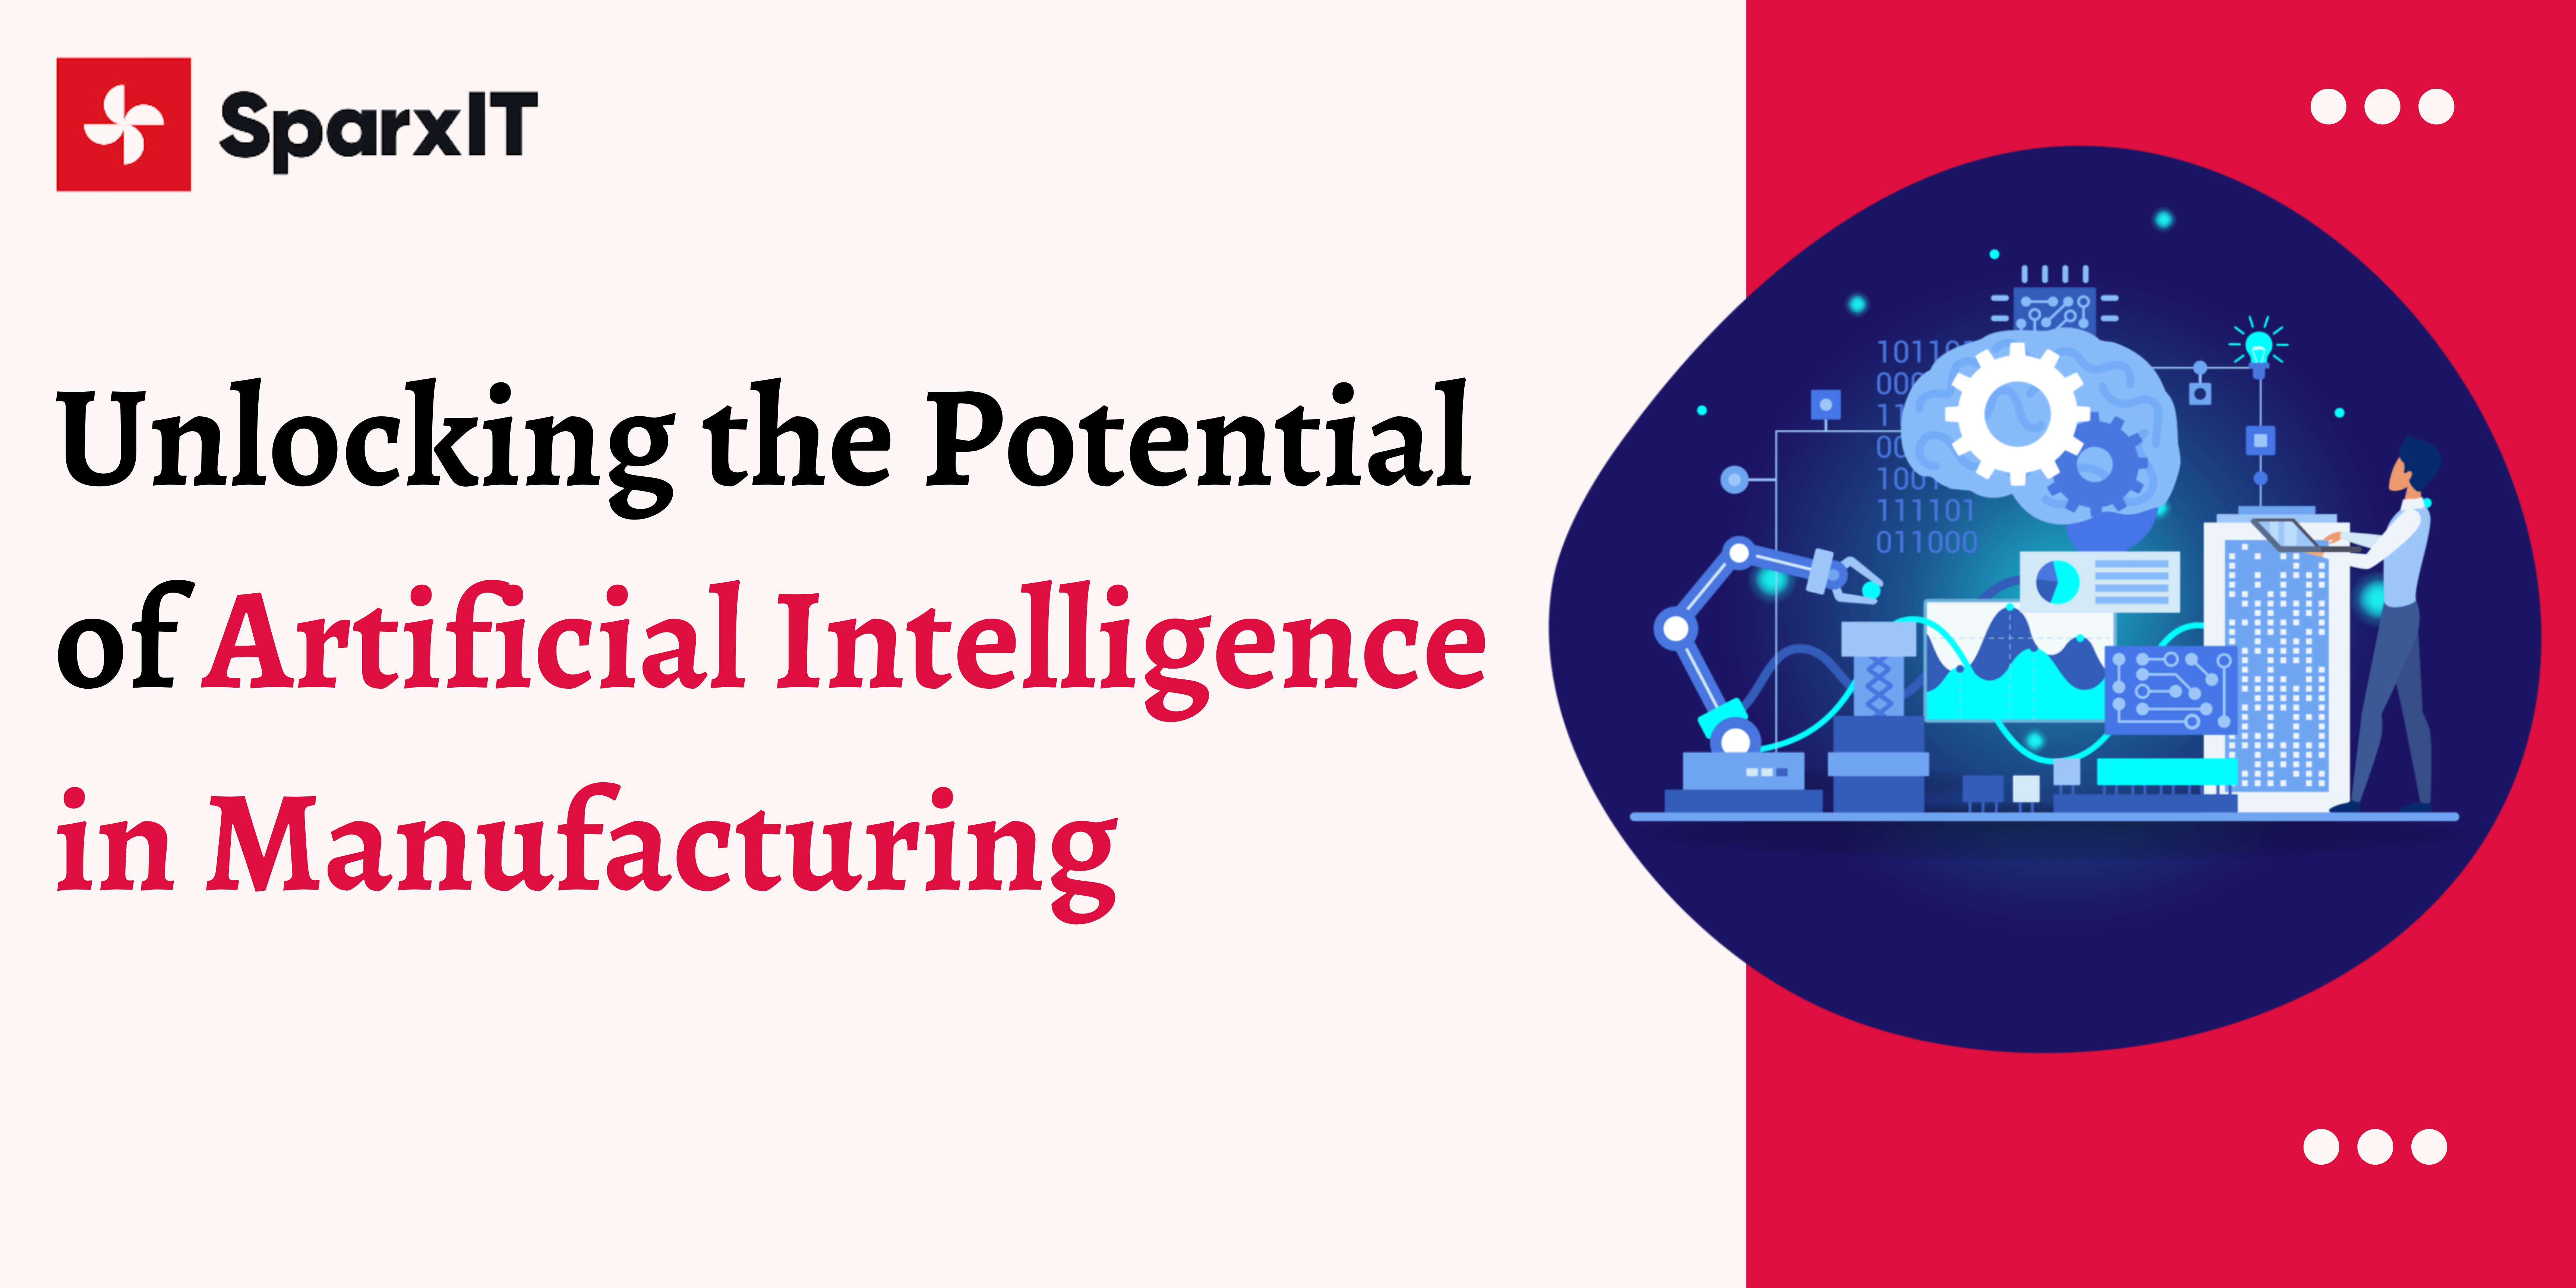 Unlocking the Potential of Artificial Intelligence in Manufacturing